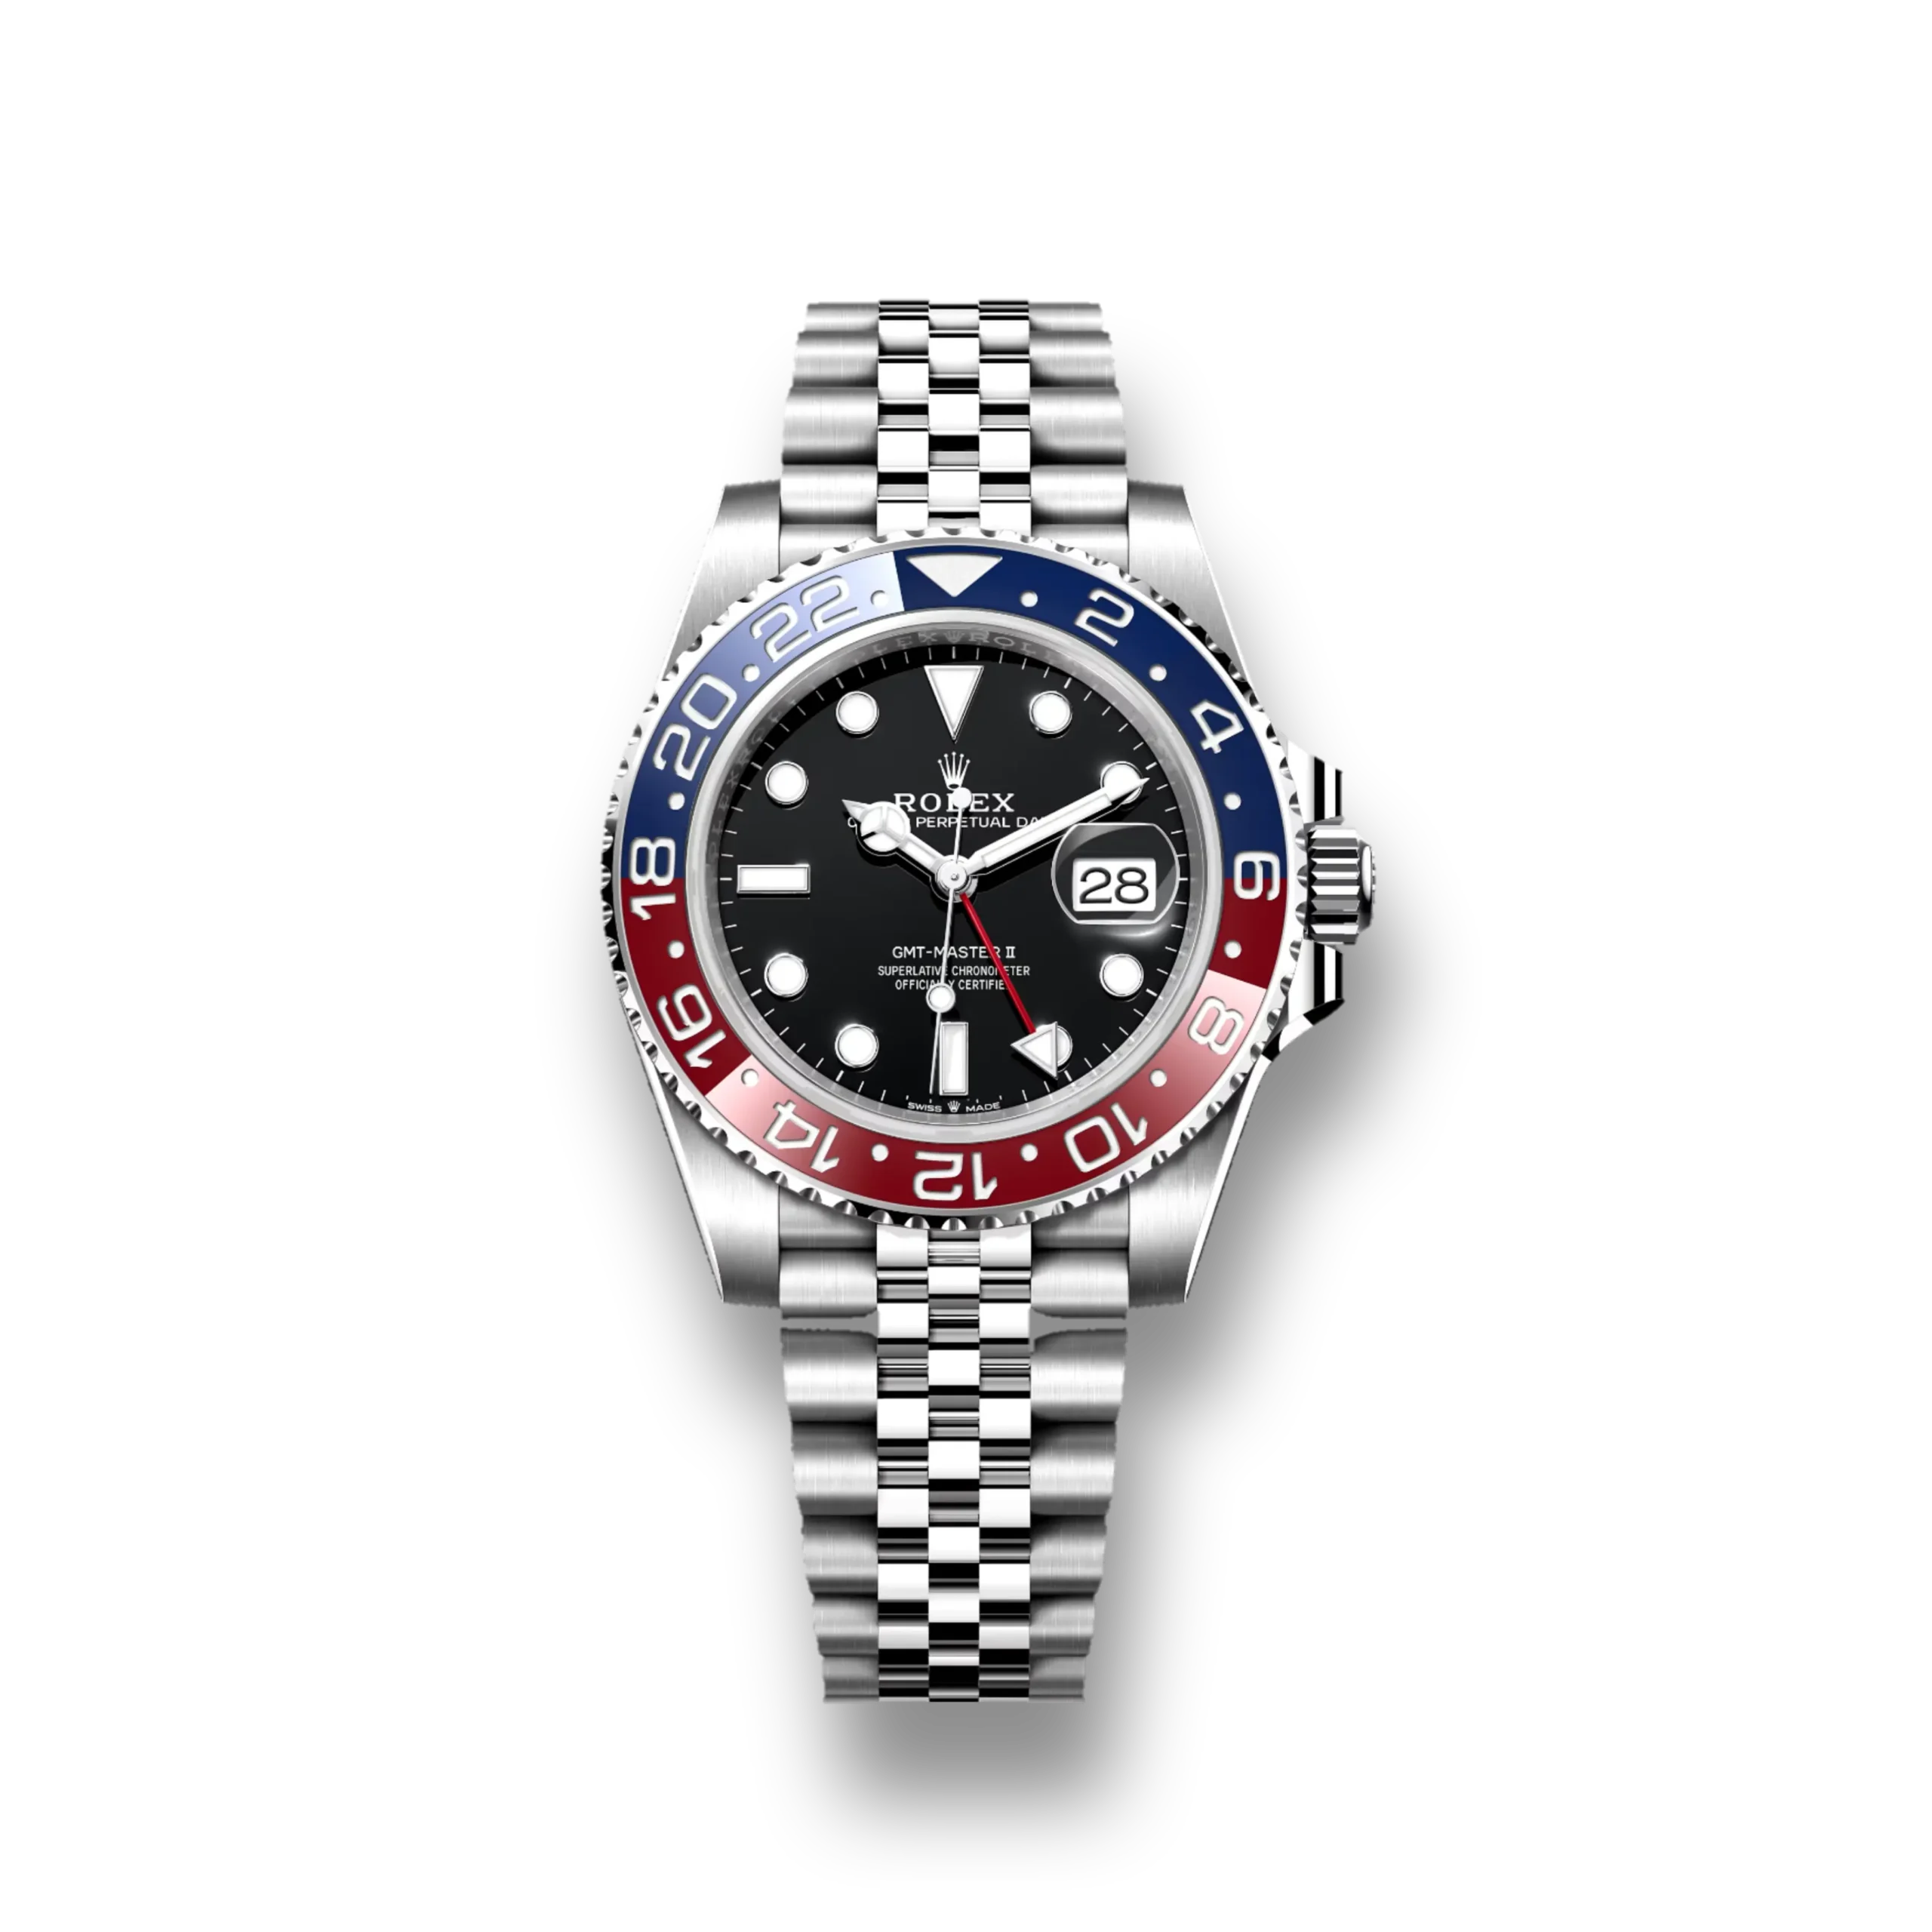 Elegant Rolex GMT Master II Pepsi Clone watch with red and blue bezel, a symbol of precision and style for men.